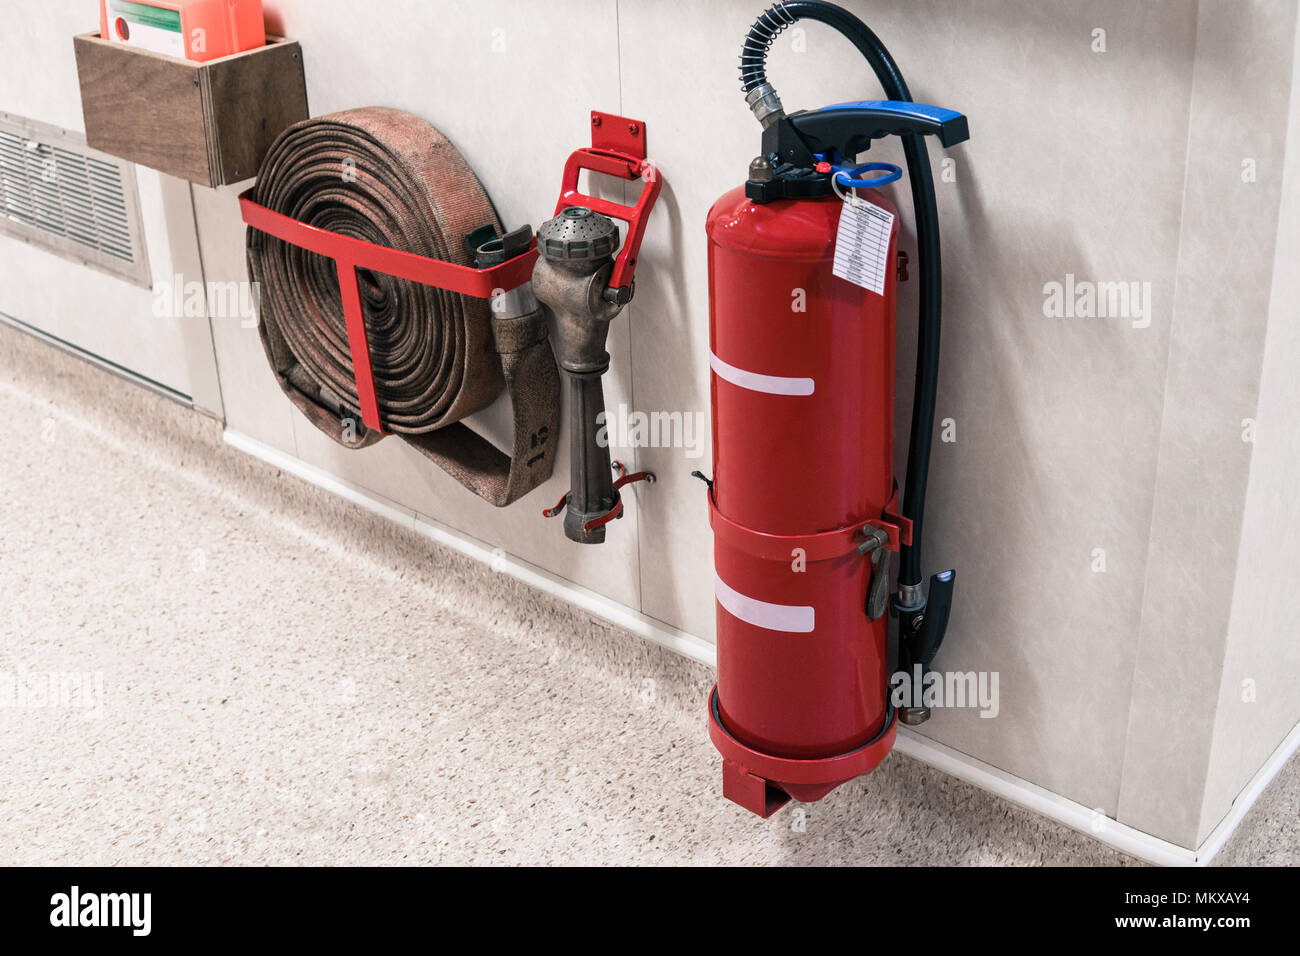 Fire extinguisher and fire hose reel in corridor Stock Photo